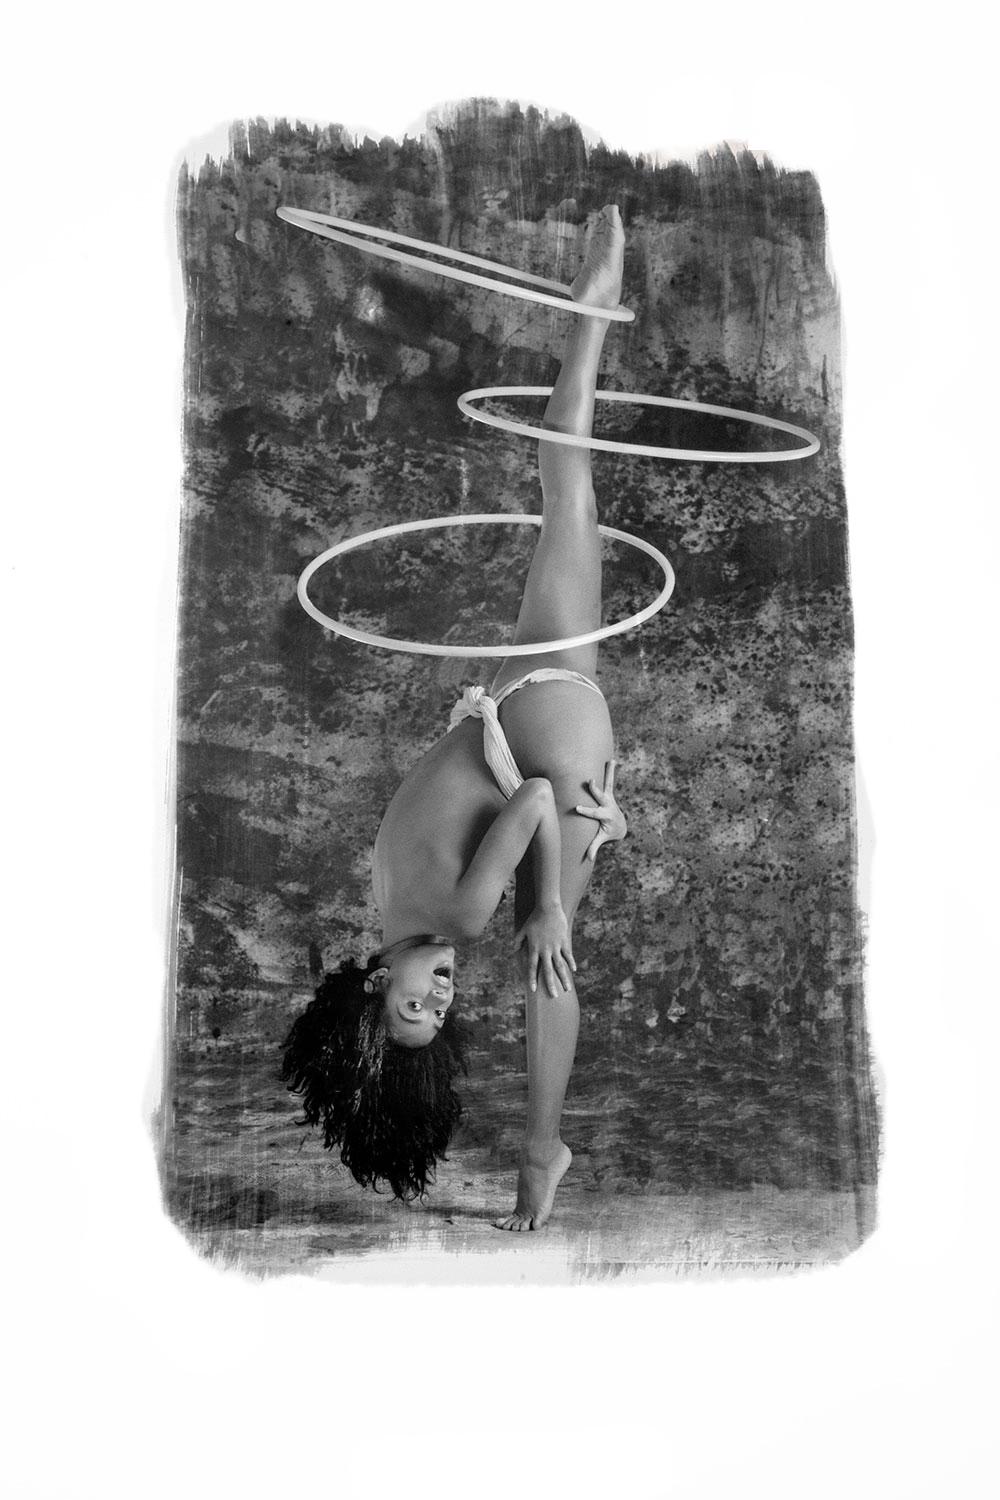 Uwe Ommer Black and White Photograph - Les Acrobates IV. Limited Edition Photograph